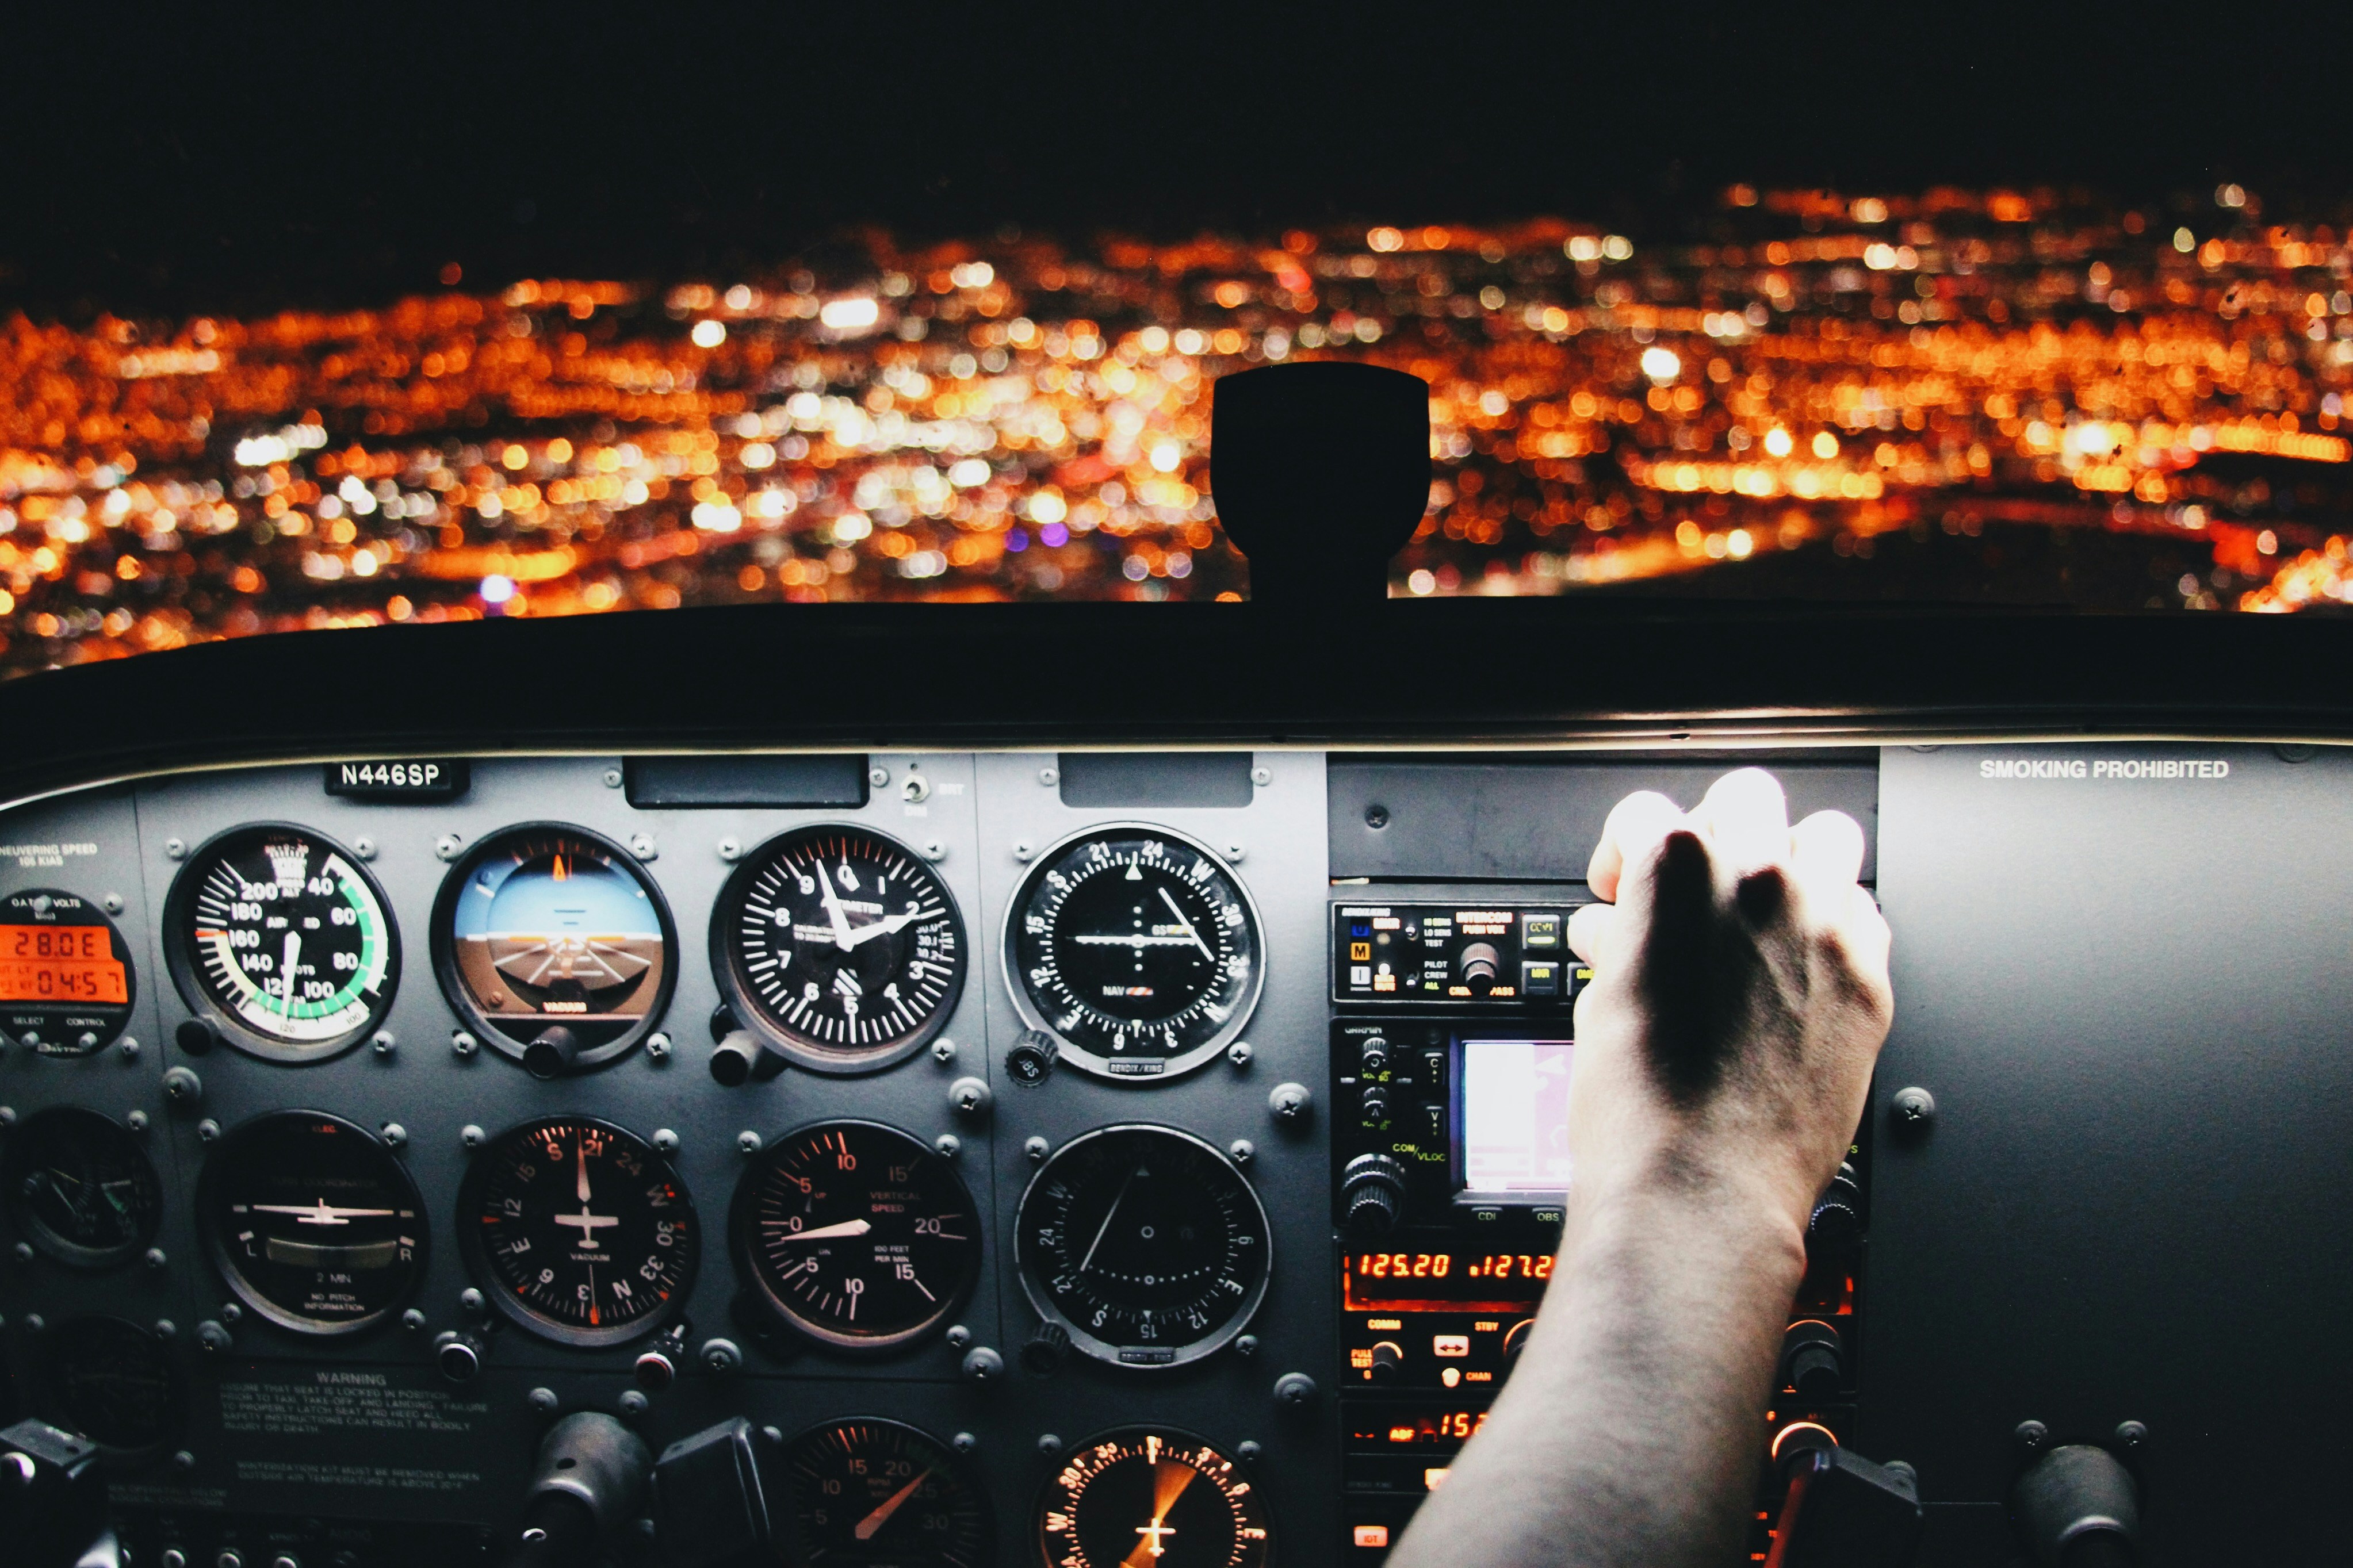 Night flying in the summer air